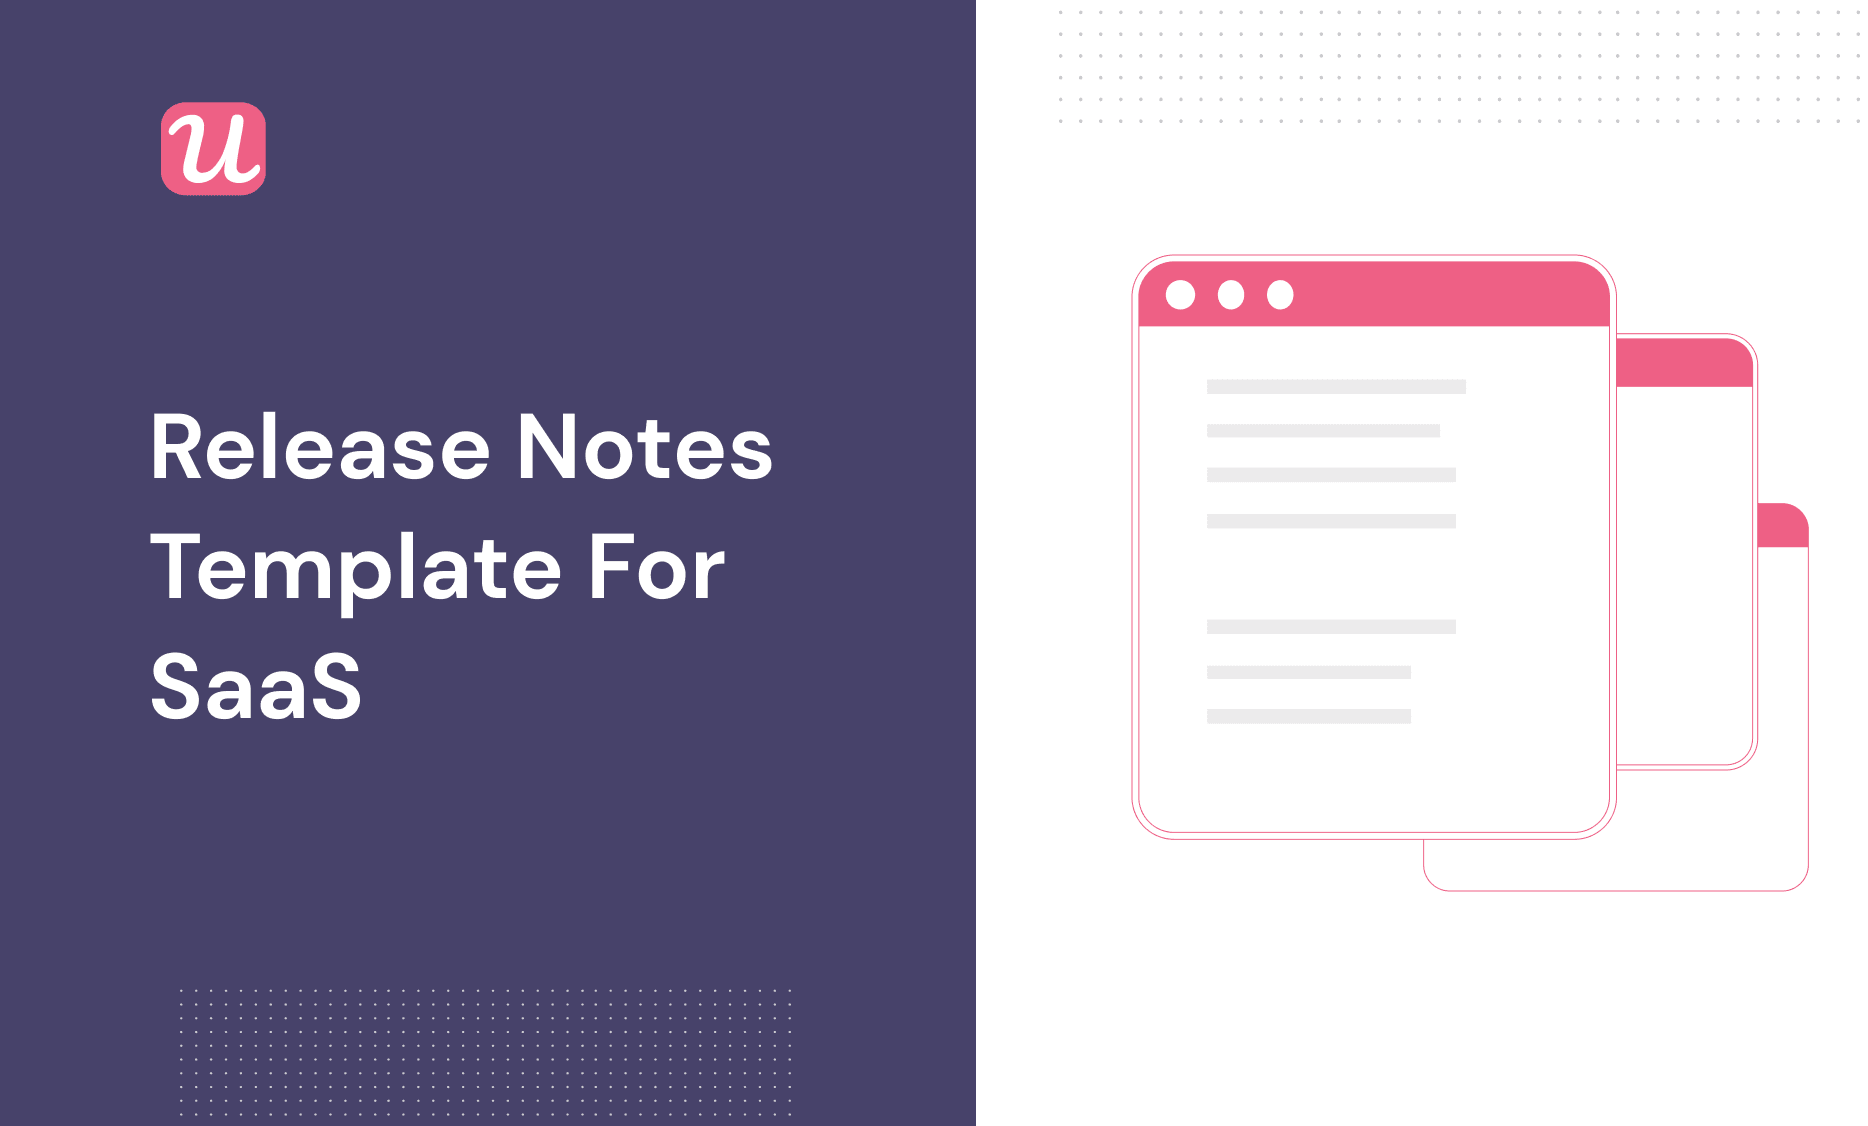 Release Notes Template for SaaS